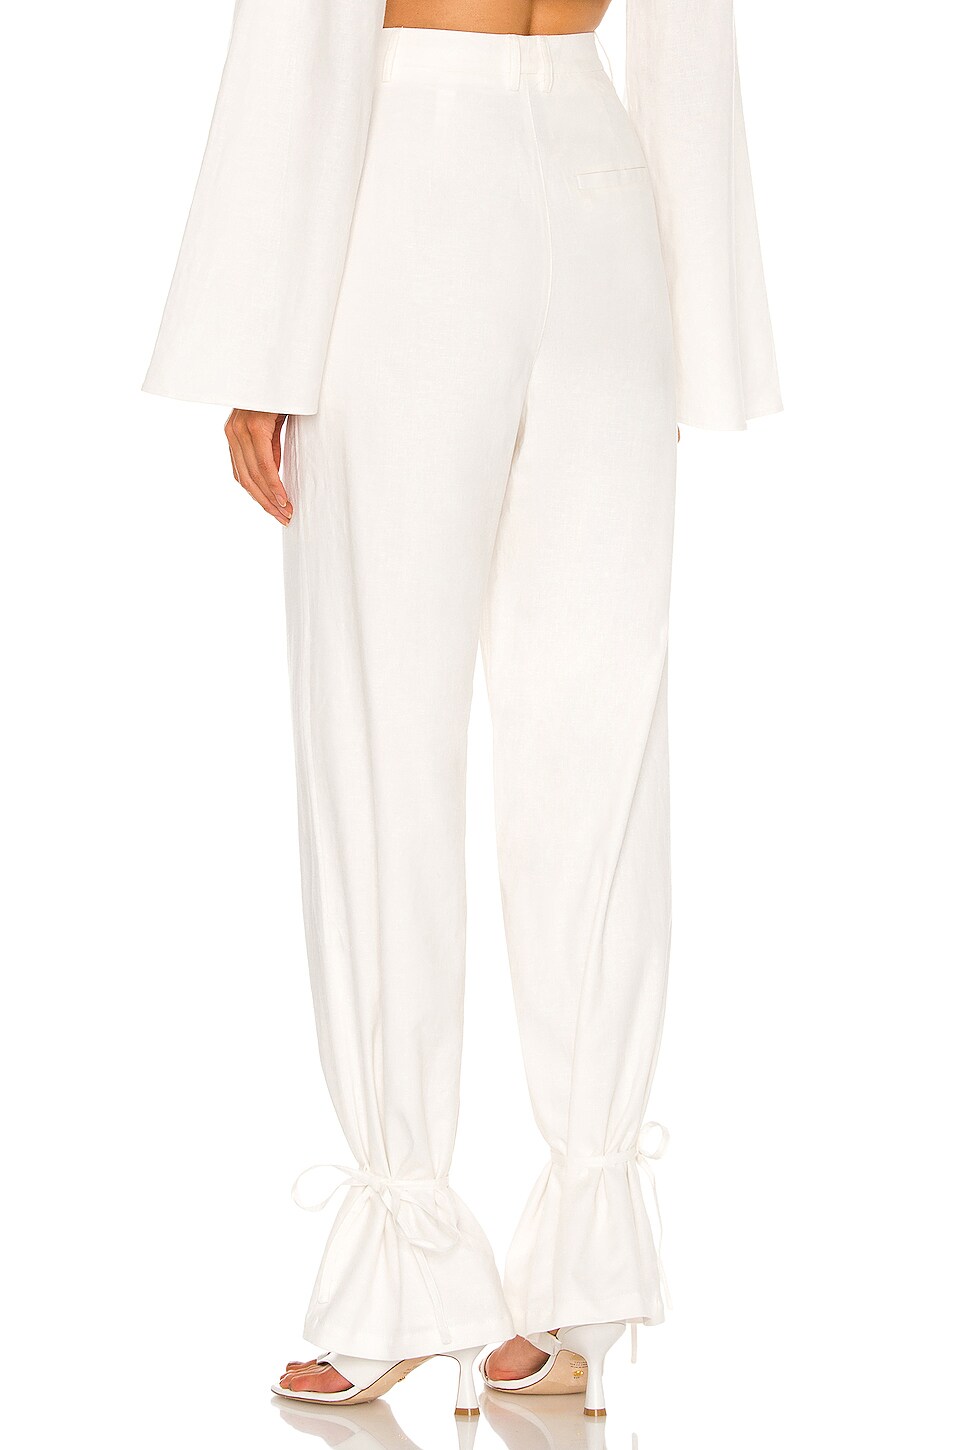 L'Academie Gather Ankle Pant in Ivory | REVOLVE